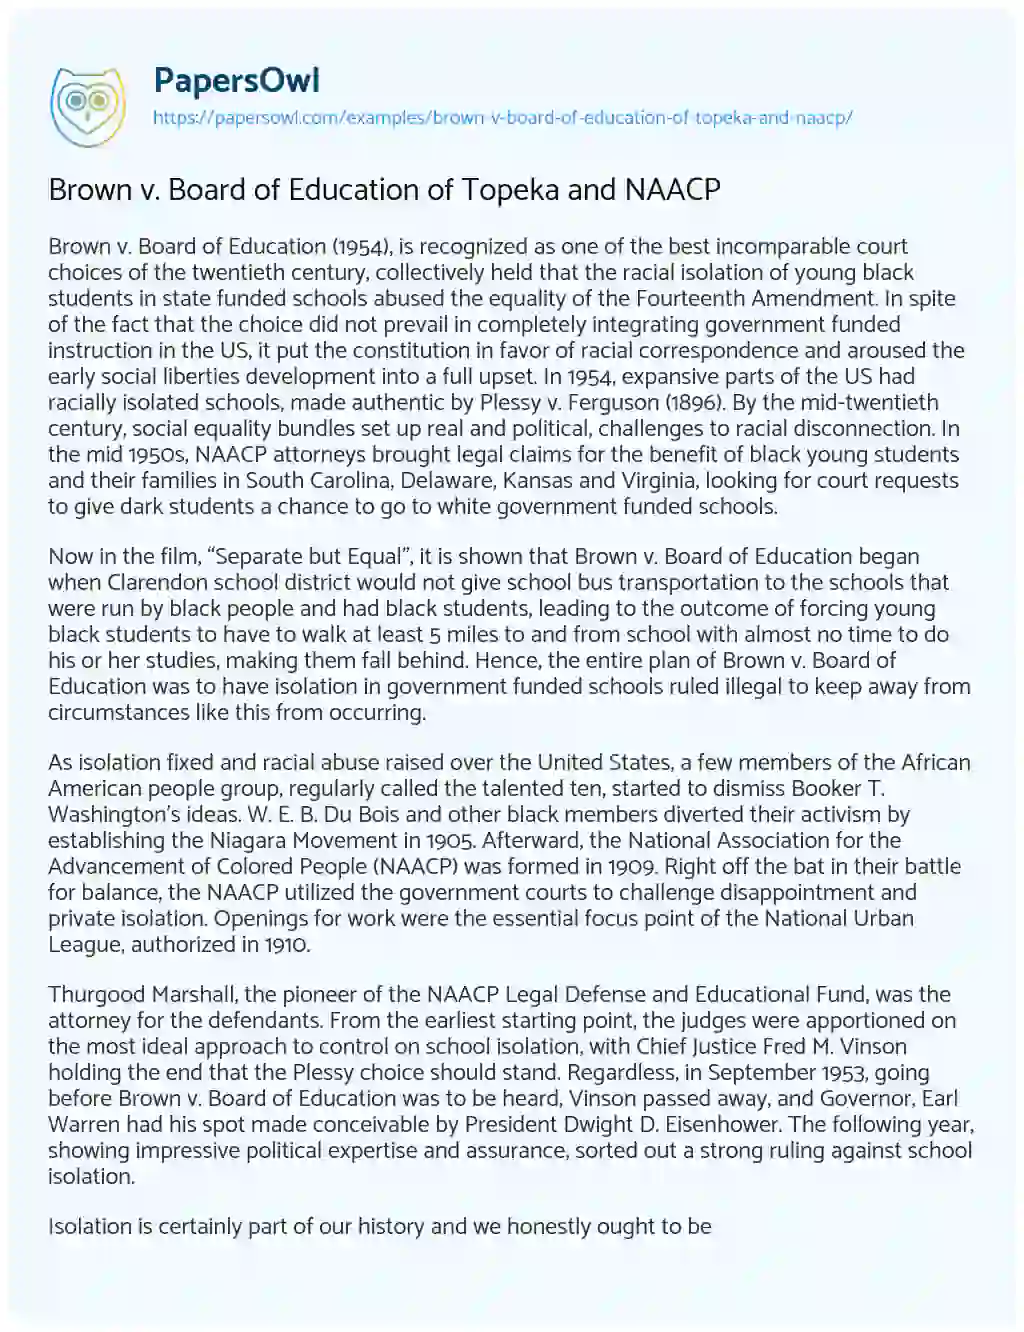 Essay on Brown V. Board of Education of Topeka and NAACP